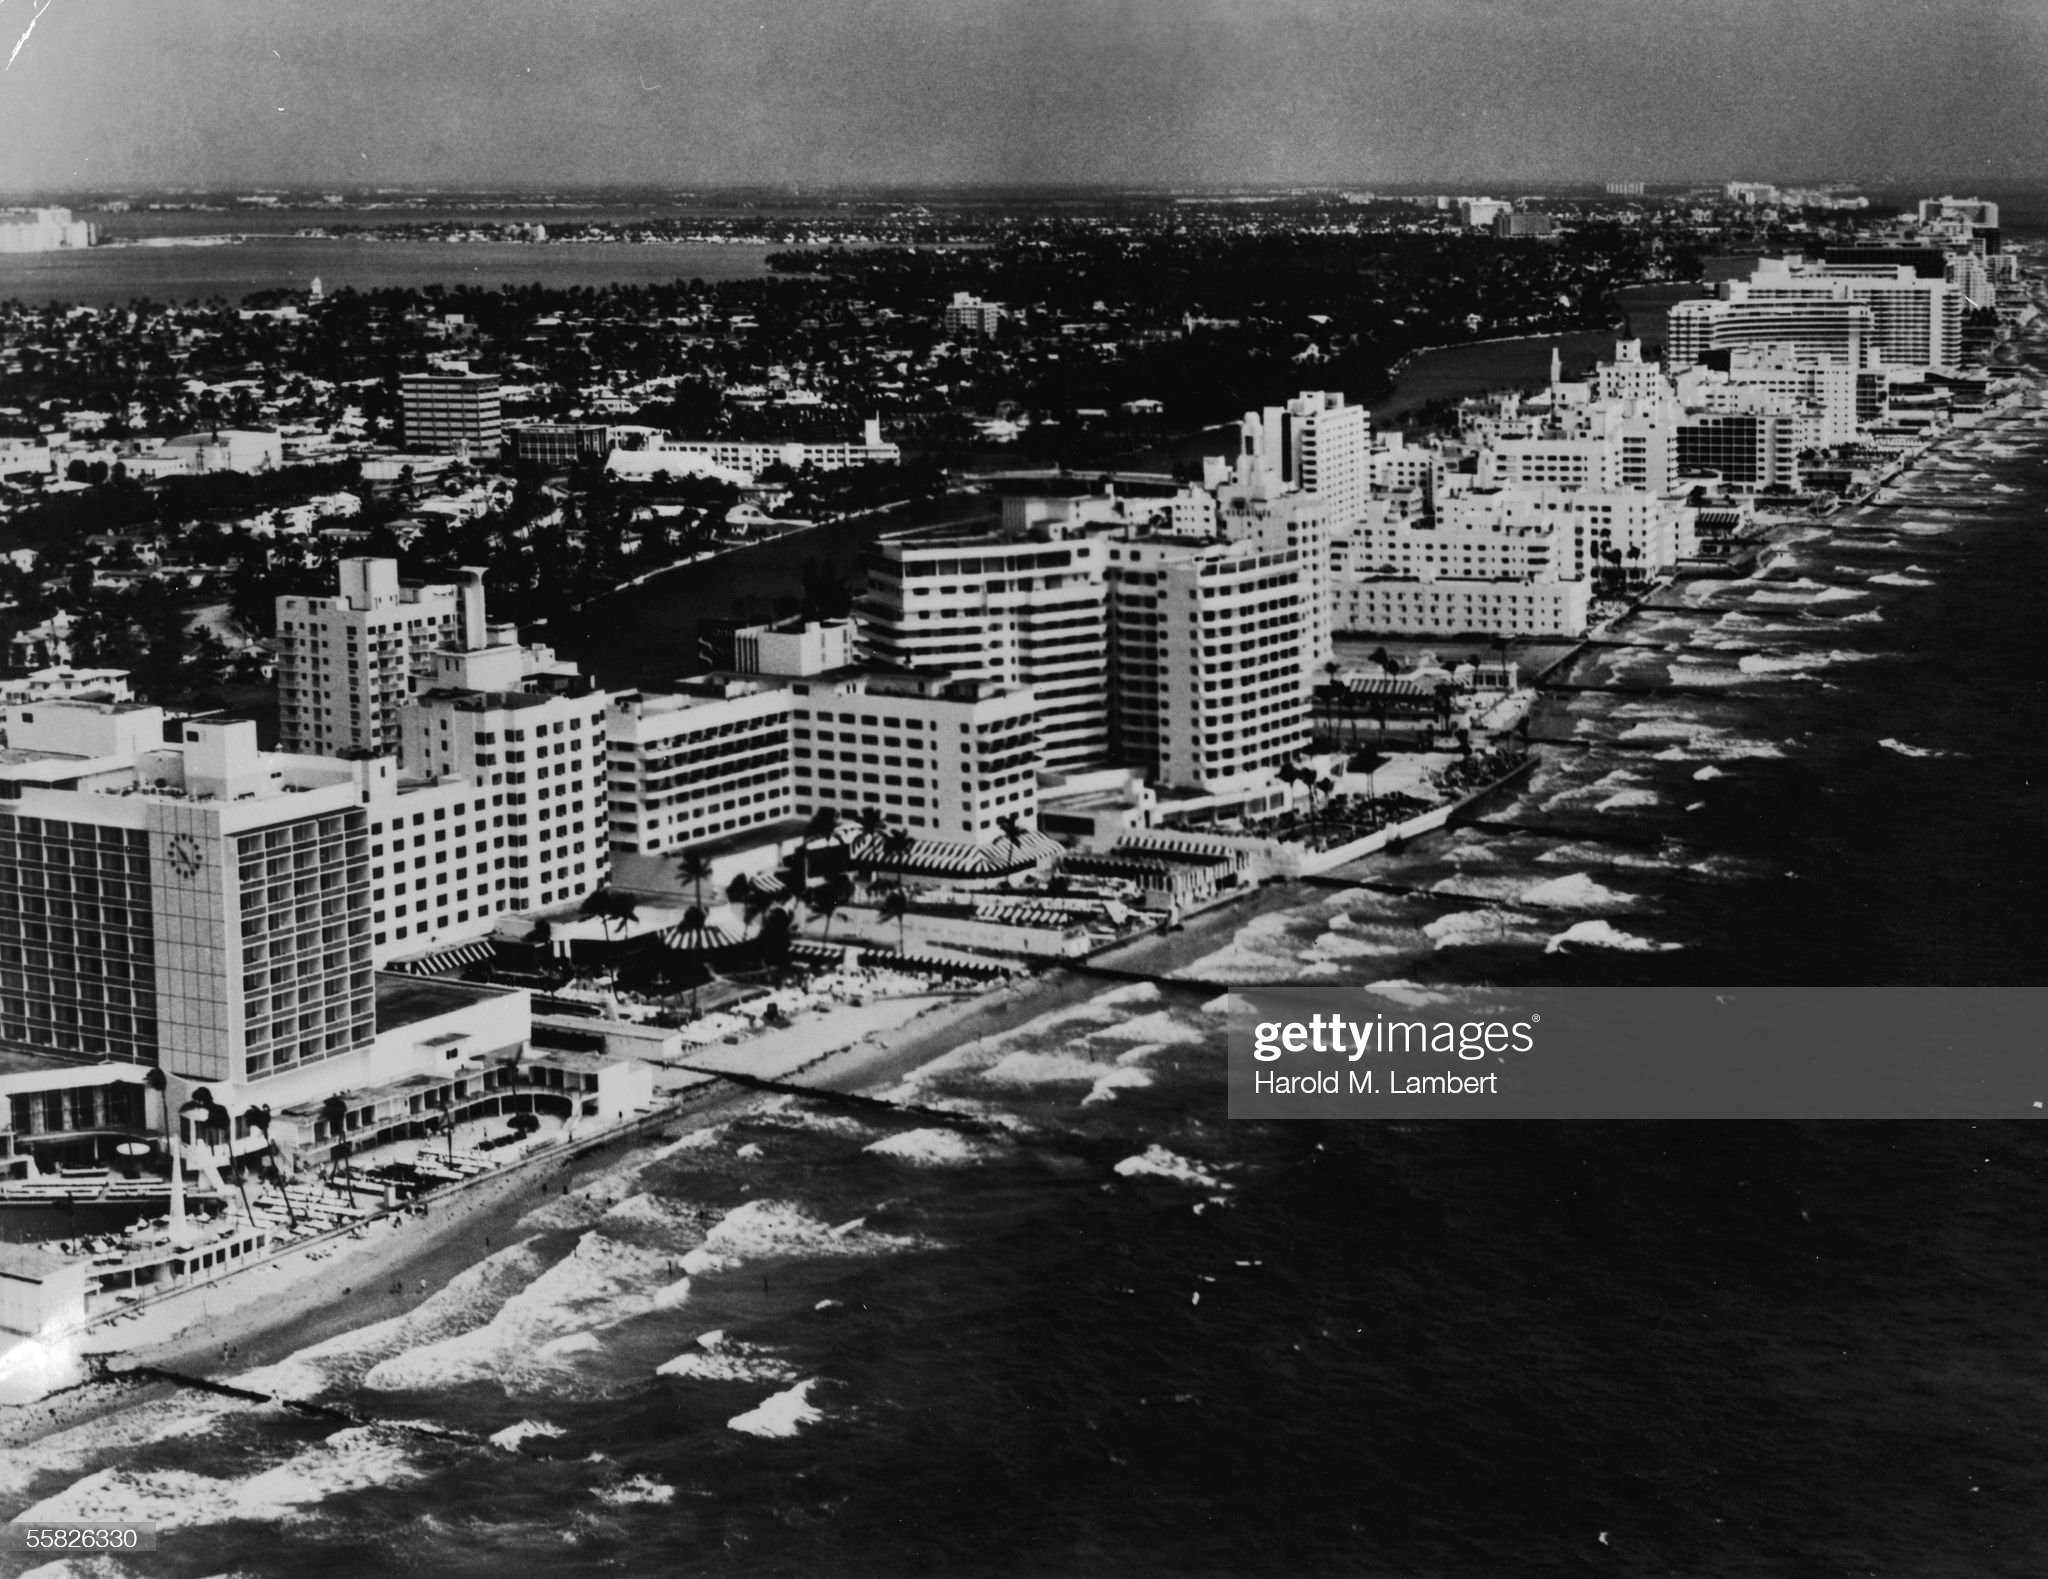 Aerial view looking North which shows the oceanfront luxury resort hotels of Miami Beach, Florida, 1950s or 1960s. Prominent buildings include the Seville, Sea Isle, San Souci, Saxony, Robert Richter and Versailles Hotels. 